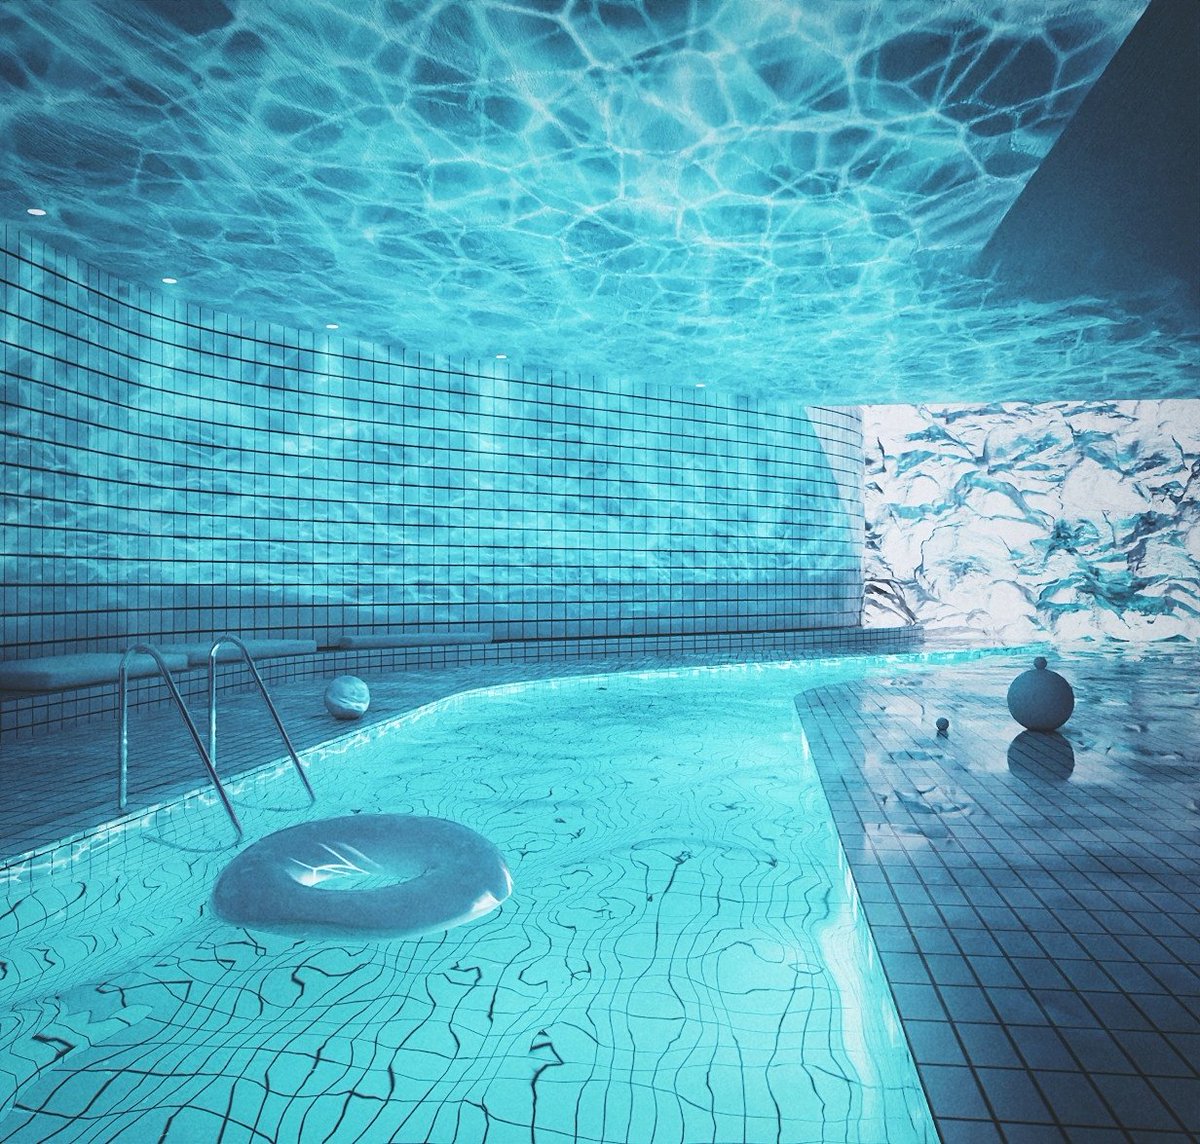 cold day at the lazy river 
#vaporwave #liminalspace #dreamcore
#poolcore #art #architecture